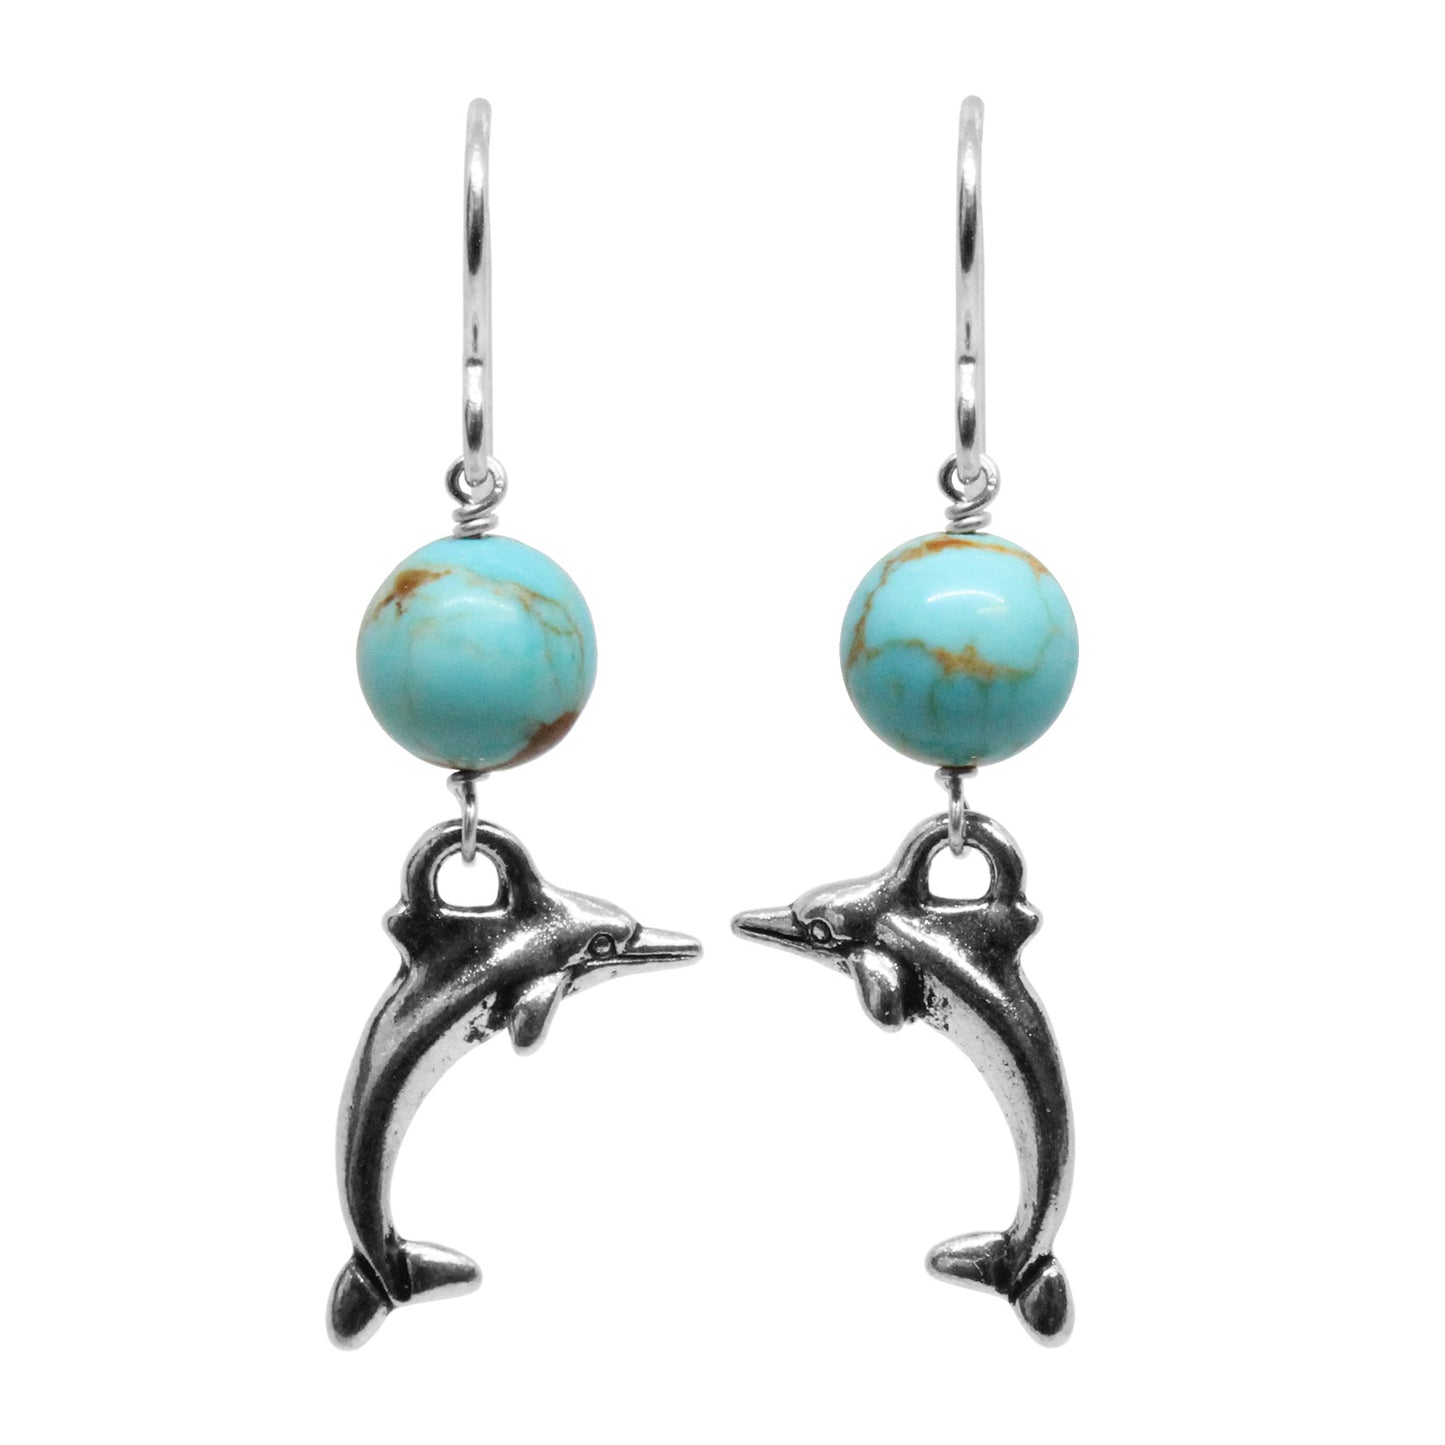 Turquoise Island Dolphin Earrings / 43mm length / sterling silver hook earwires